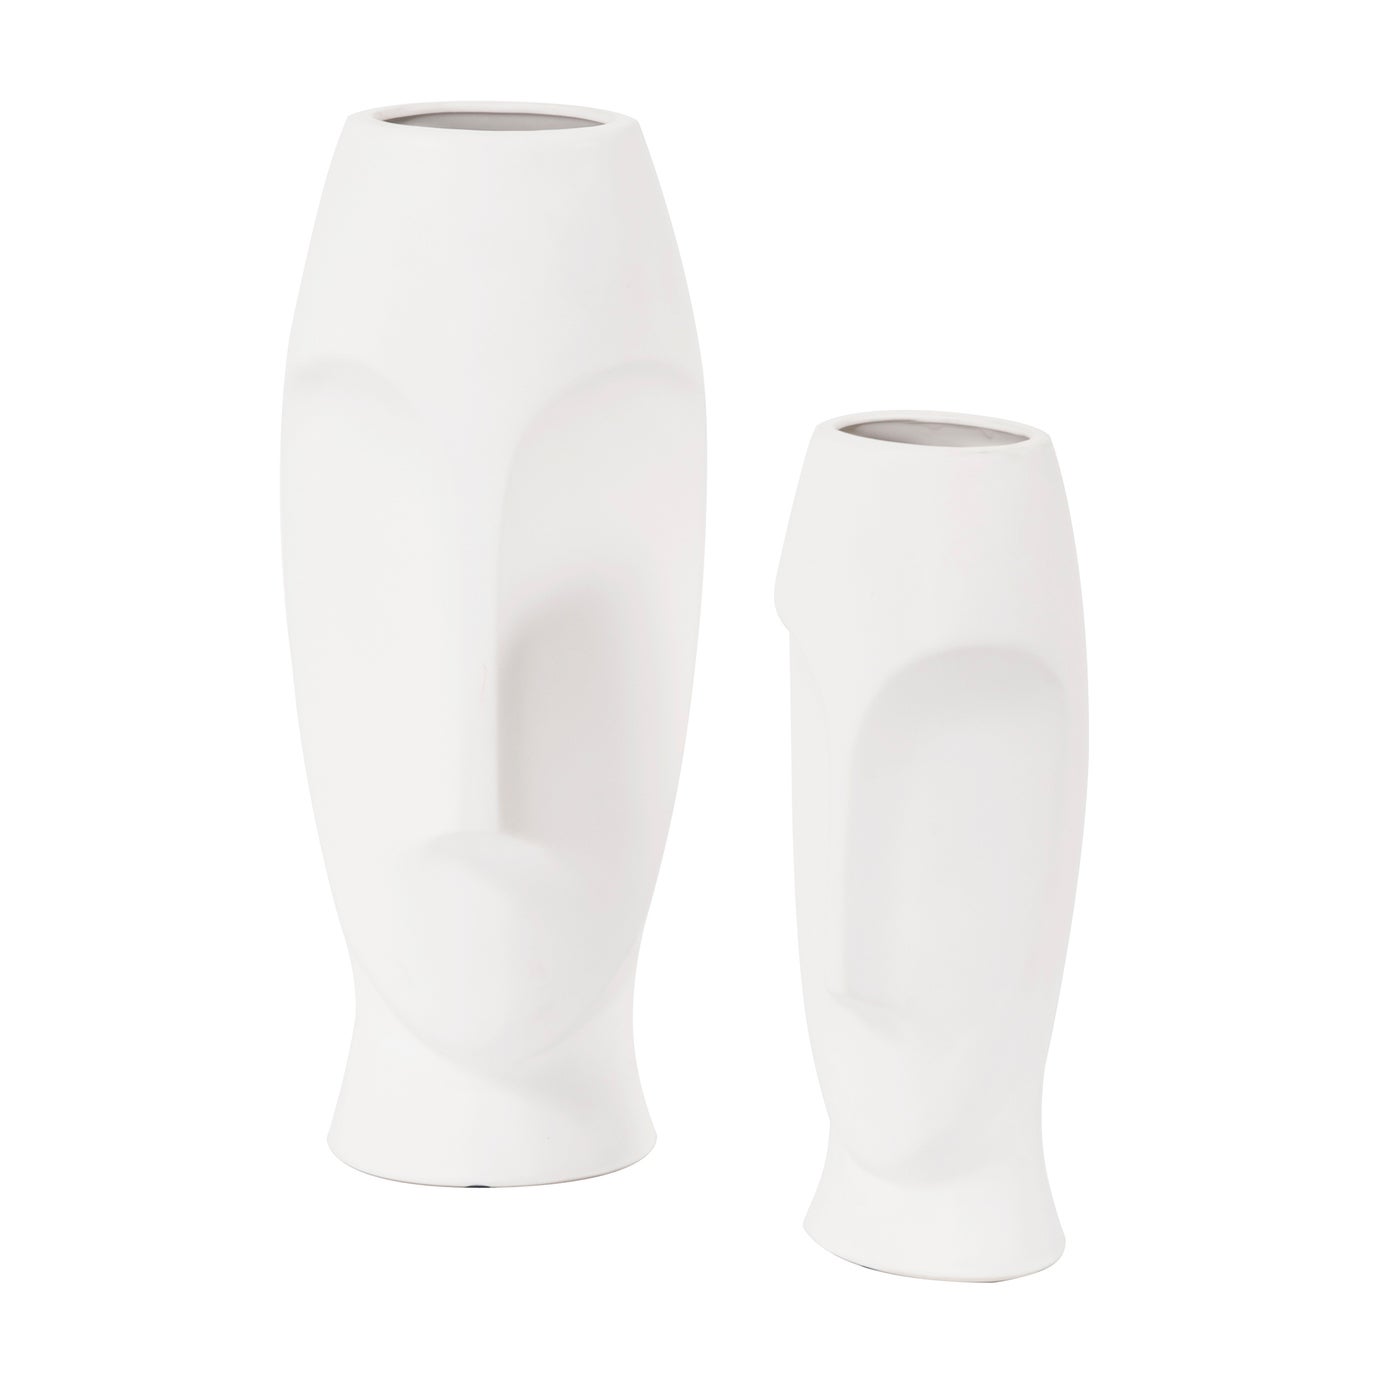 Abstract Faces White Ceramic Vase (Set of 2)